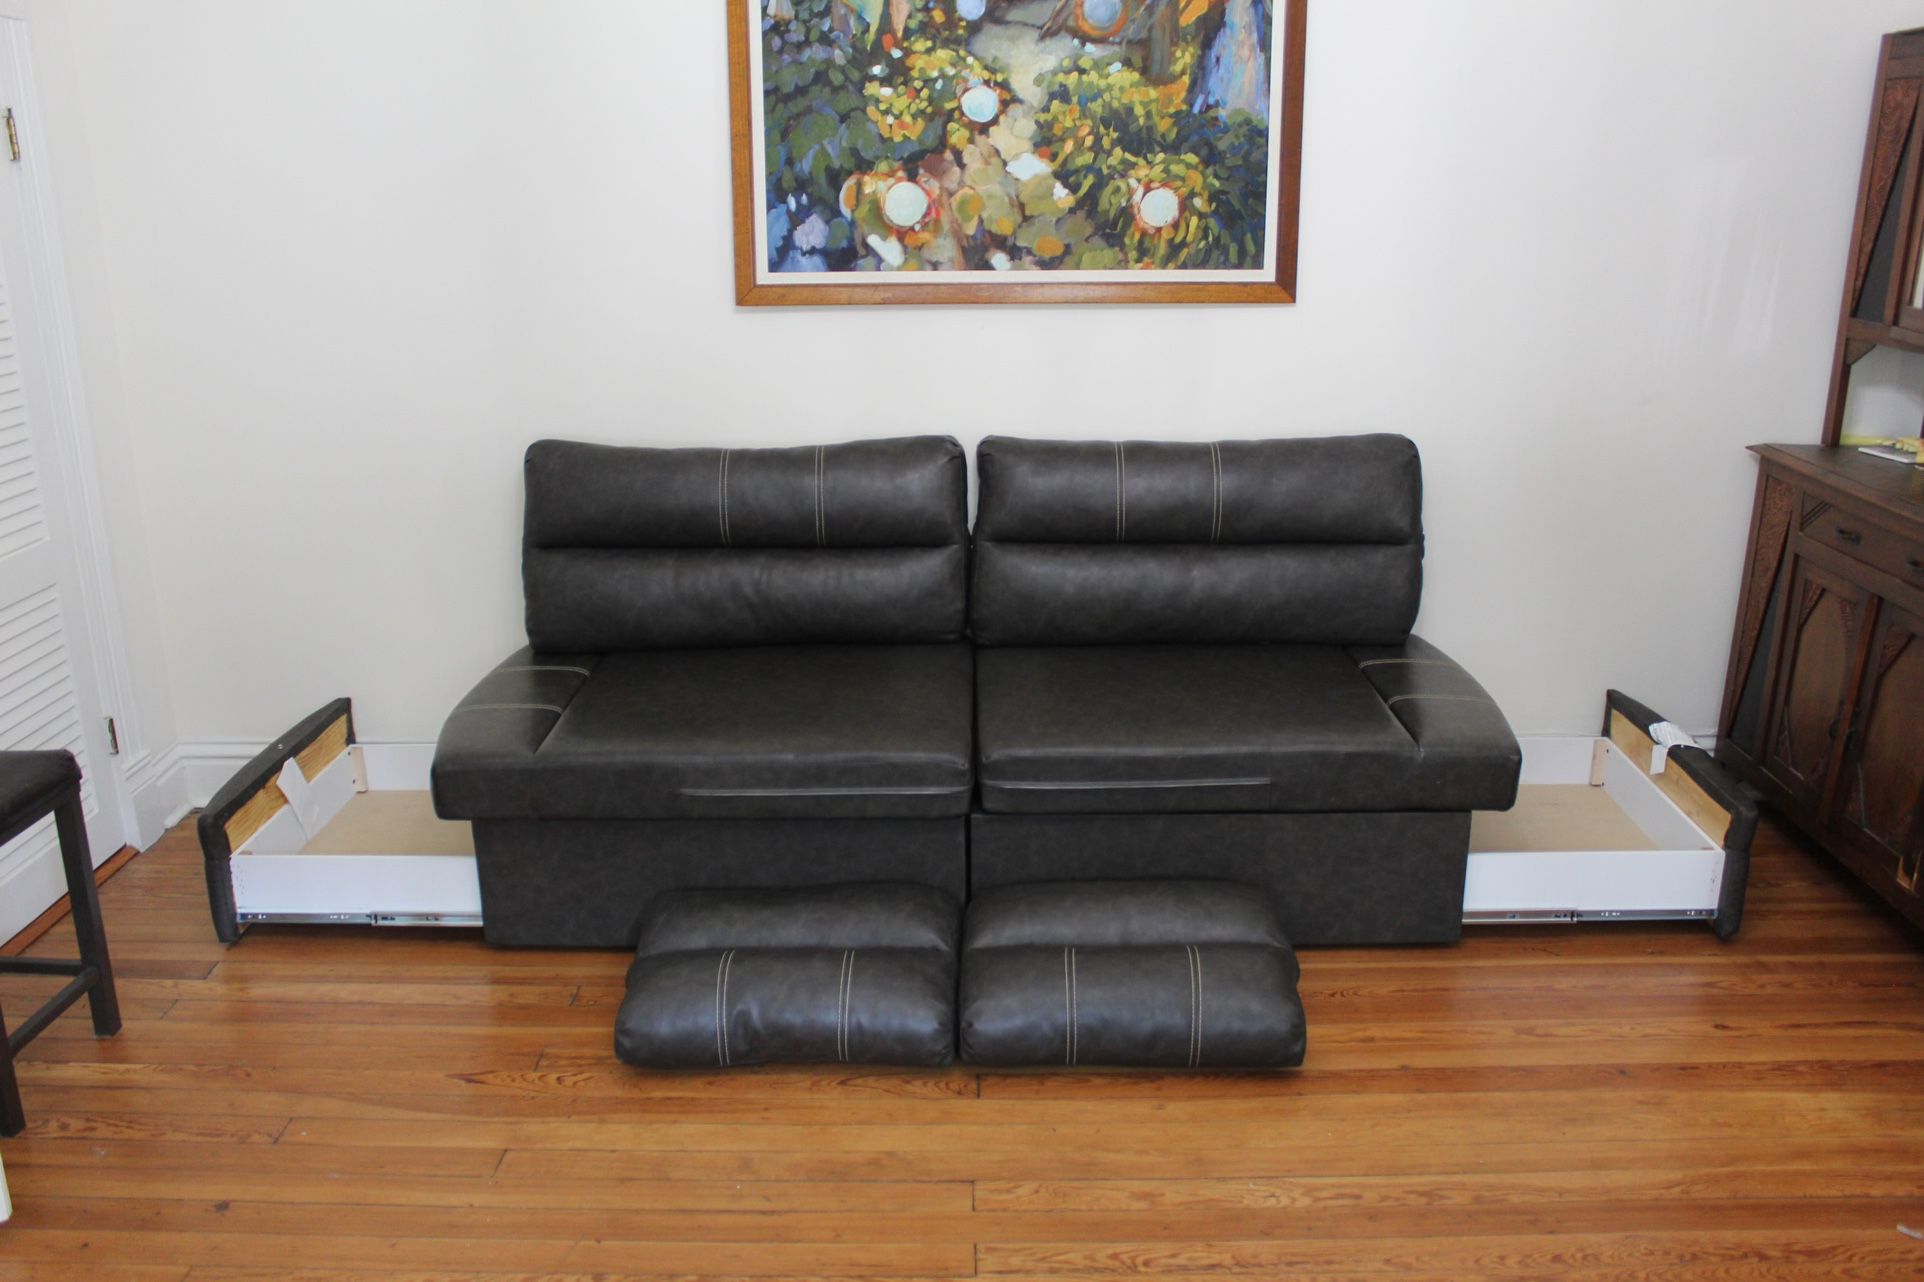 FREE DELIVERY 🚚 Mastercraft Two Peice Leather RV Couch